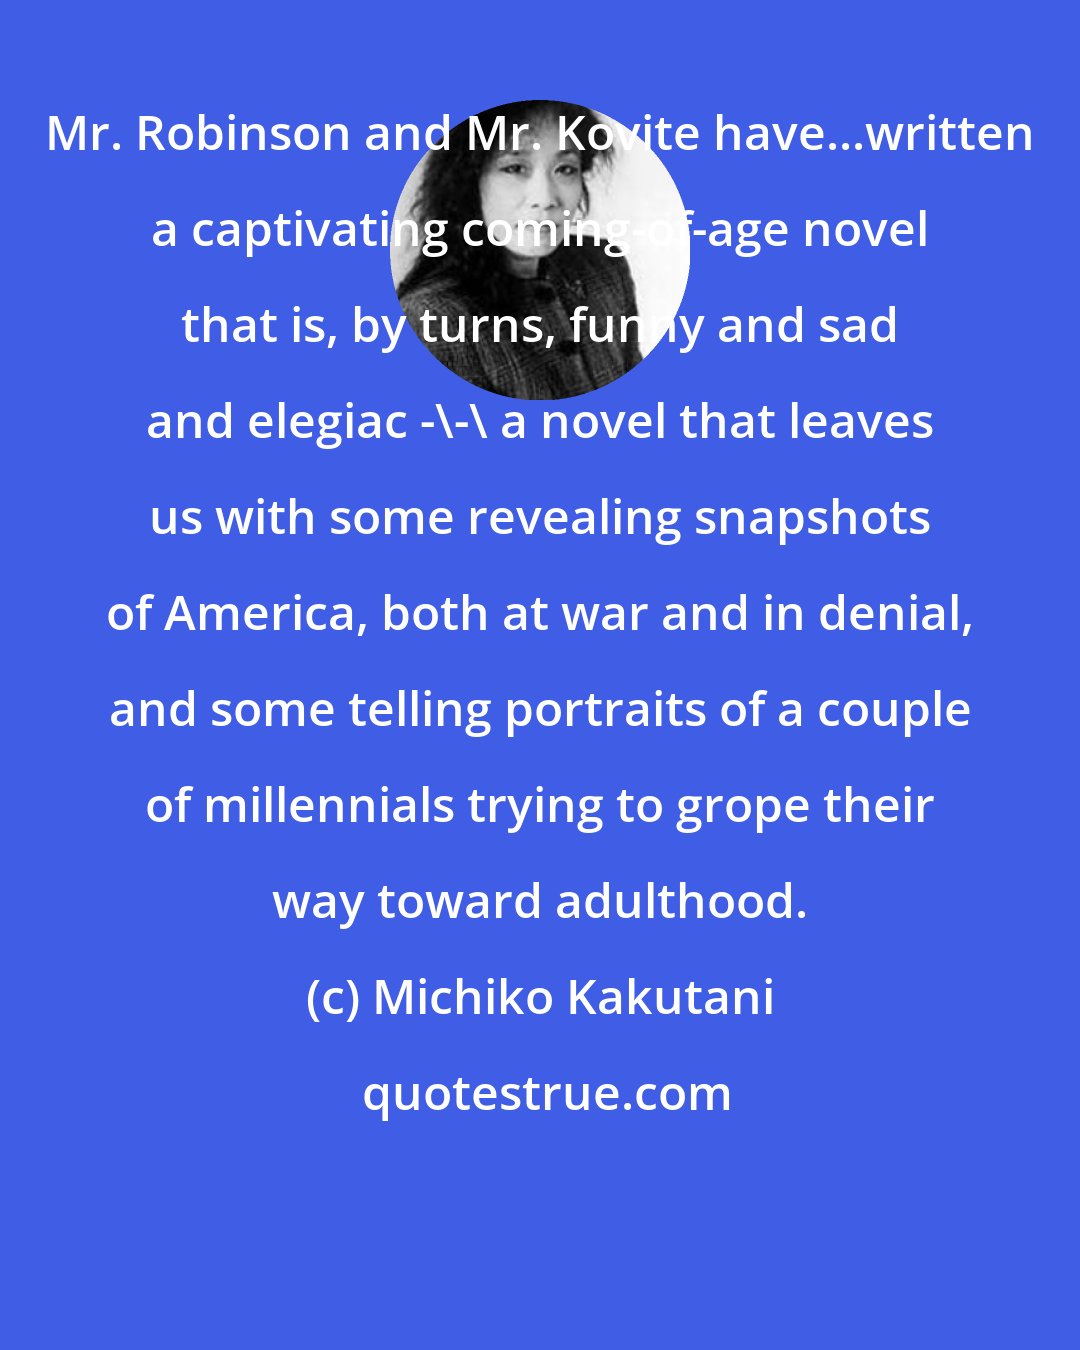 Michiko Kakutani: Mr. Robinson and Mr. Kovite have...written a captivating coming-of-age novel that is, by turns, funny and sad and elegiac -\-\ a novel that leaves us with some revealing snapshots of America, both at war and in denial, and some telling portraits of a couple of millennials trying to grope their way toward adulthood.